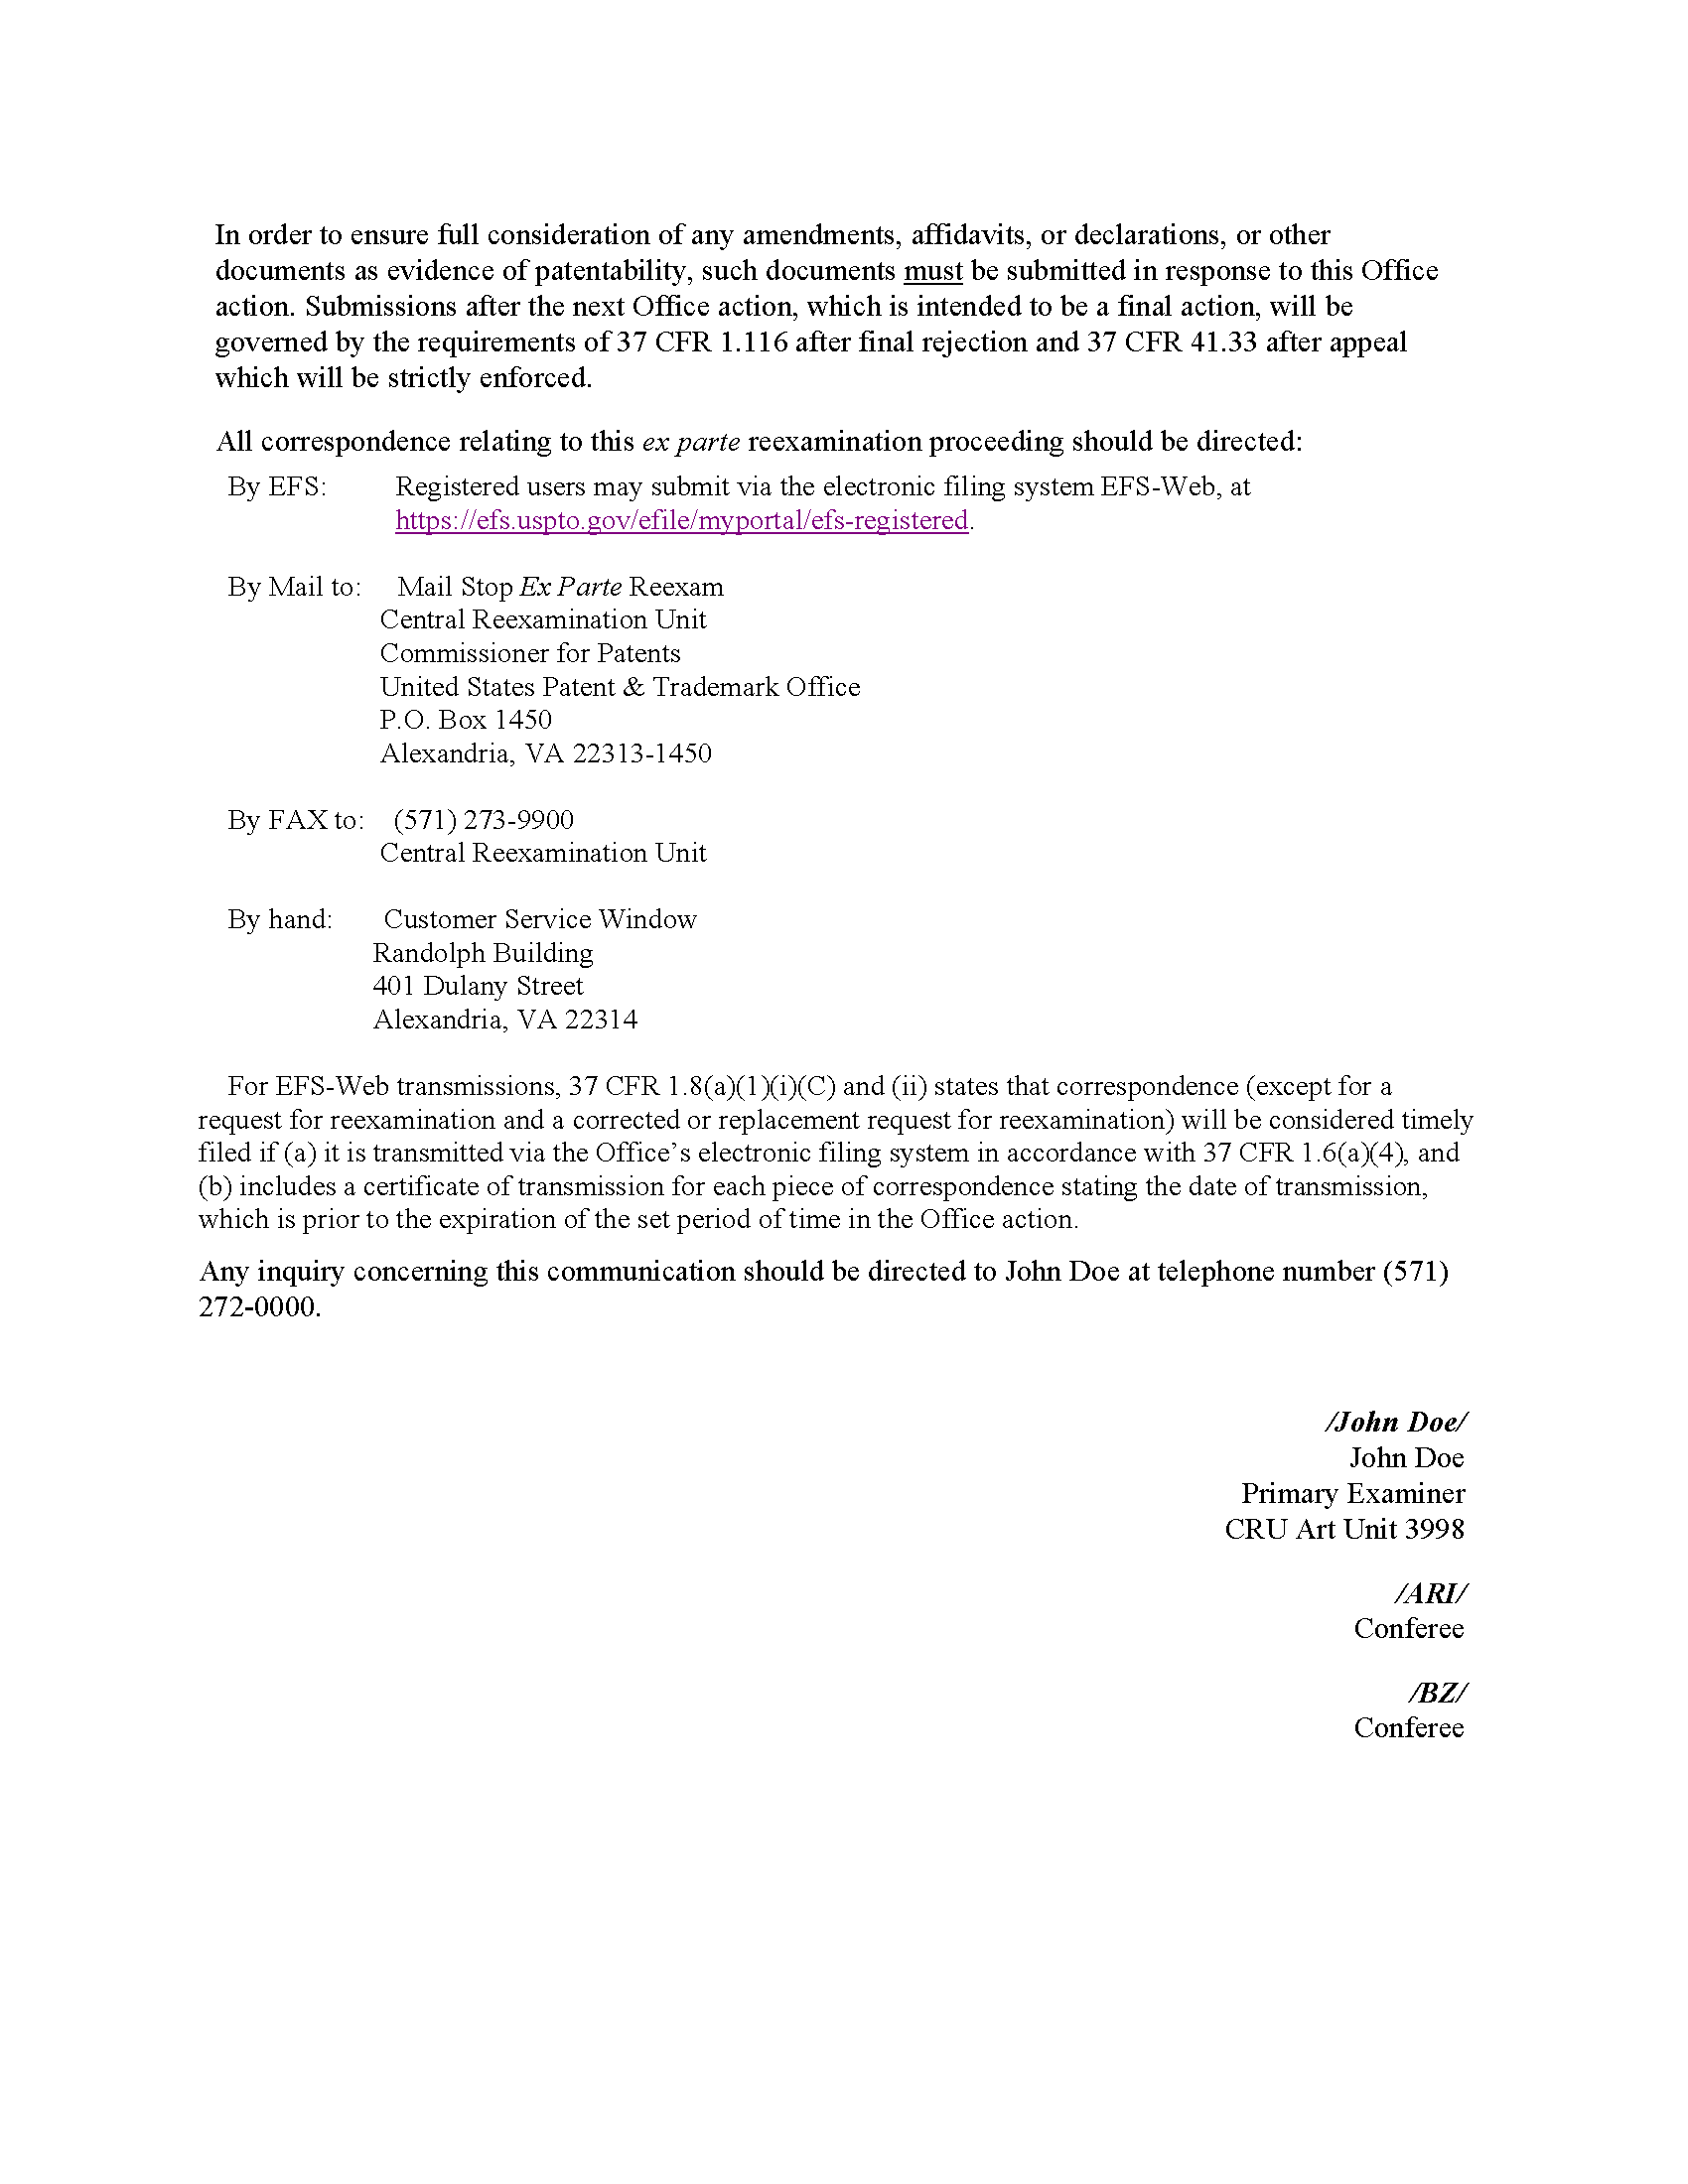 Text of a sample Office Action from Reexamination Proceeding (page 2 of 2)